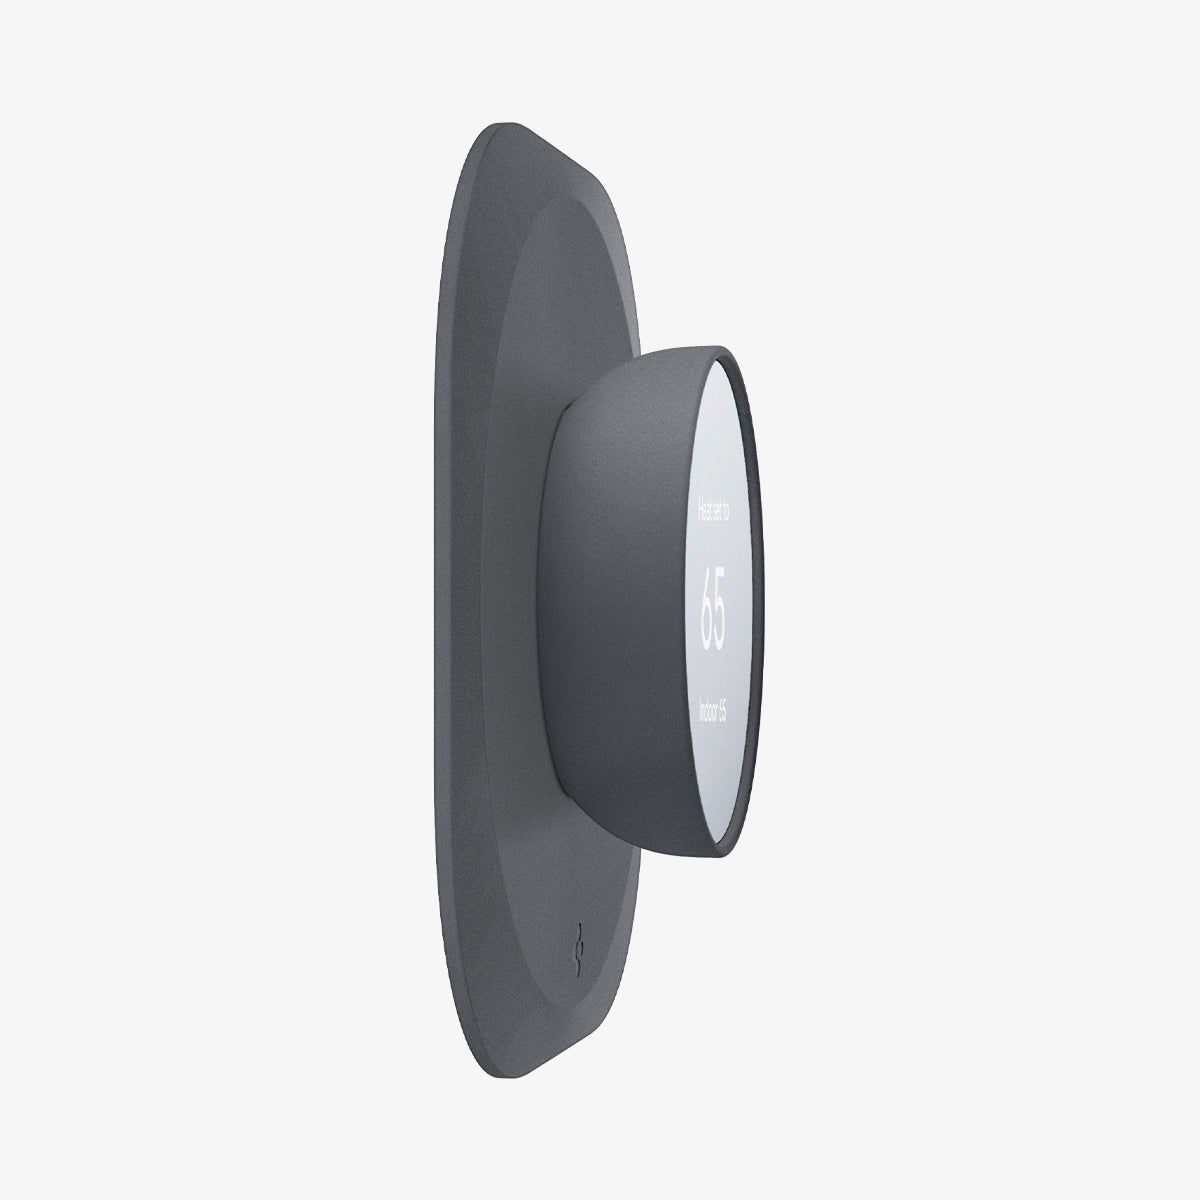 AHP02762 - Google Nest Thermostat Wall Plate in charcoal showing the side and partial front